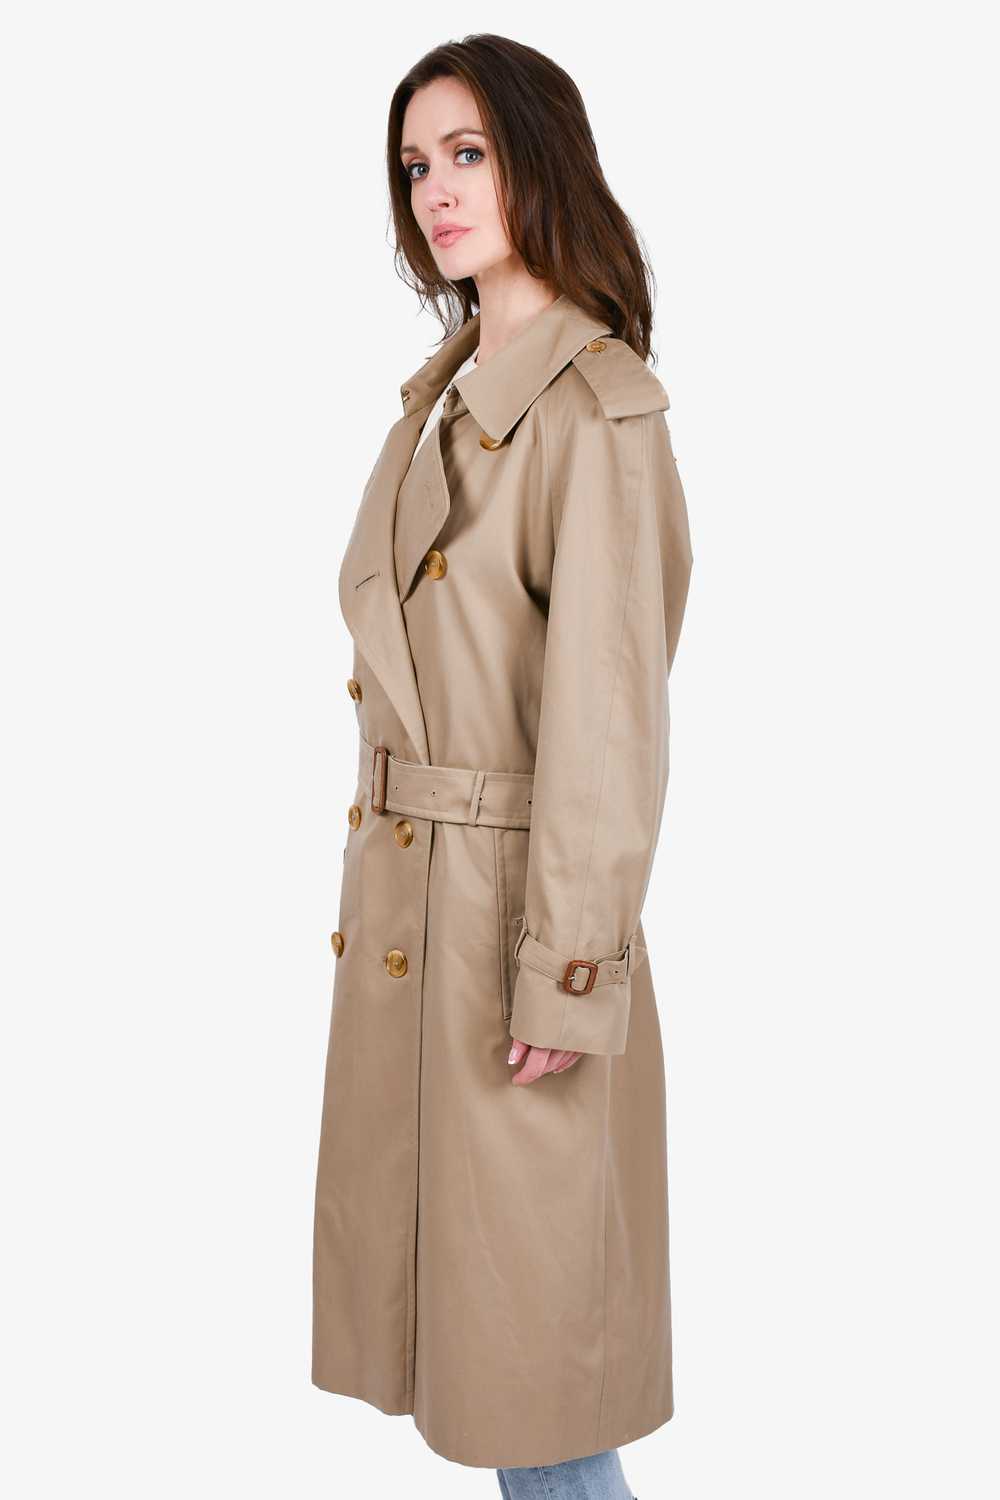 Burberrys Beige Wool Vintage Belted Trench Coat S… - image 2